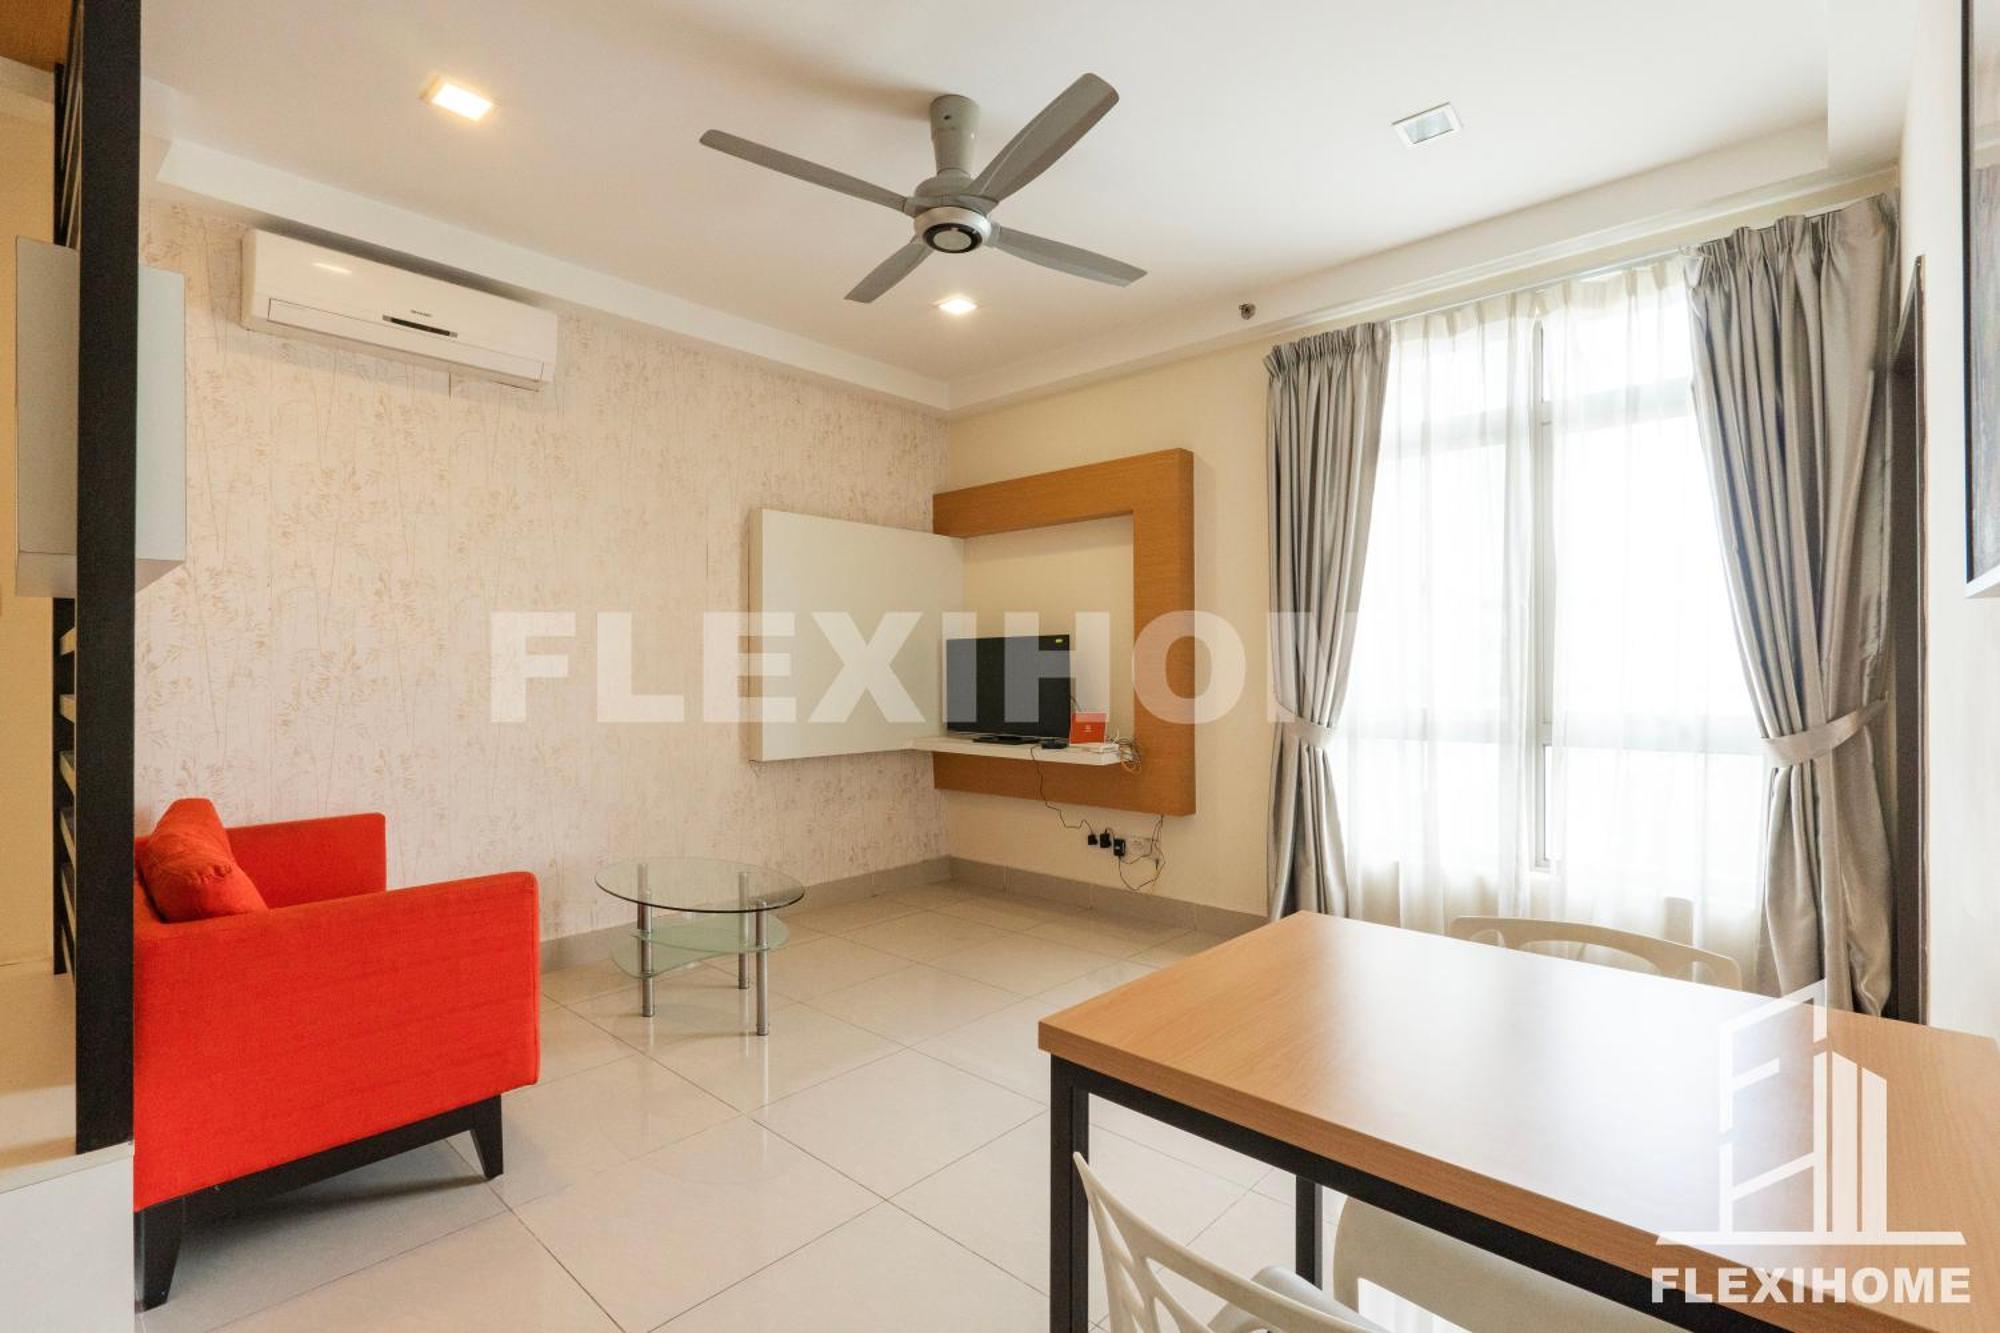 9Am-5Pm, Same Day Check In And Check Out, Work From Home, Shaftsbury-Cyberjaya, Comfy Home By Flexihome-My 外观 照片